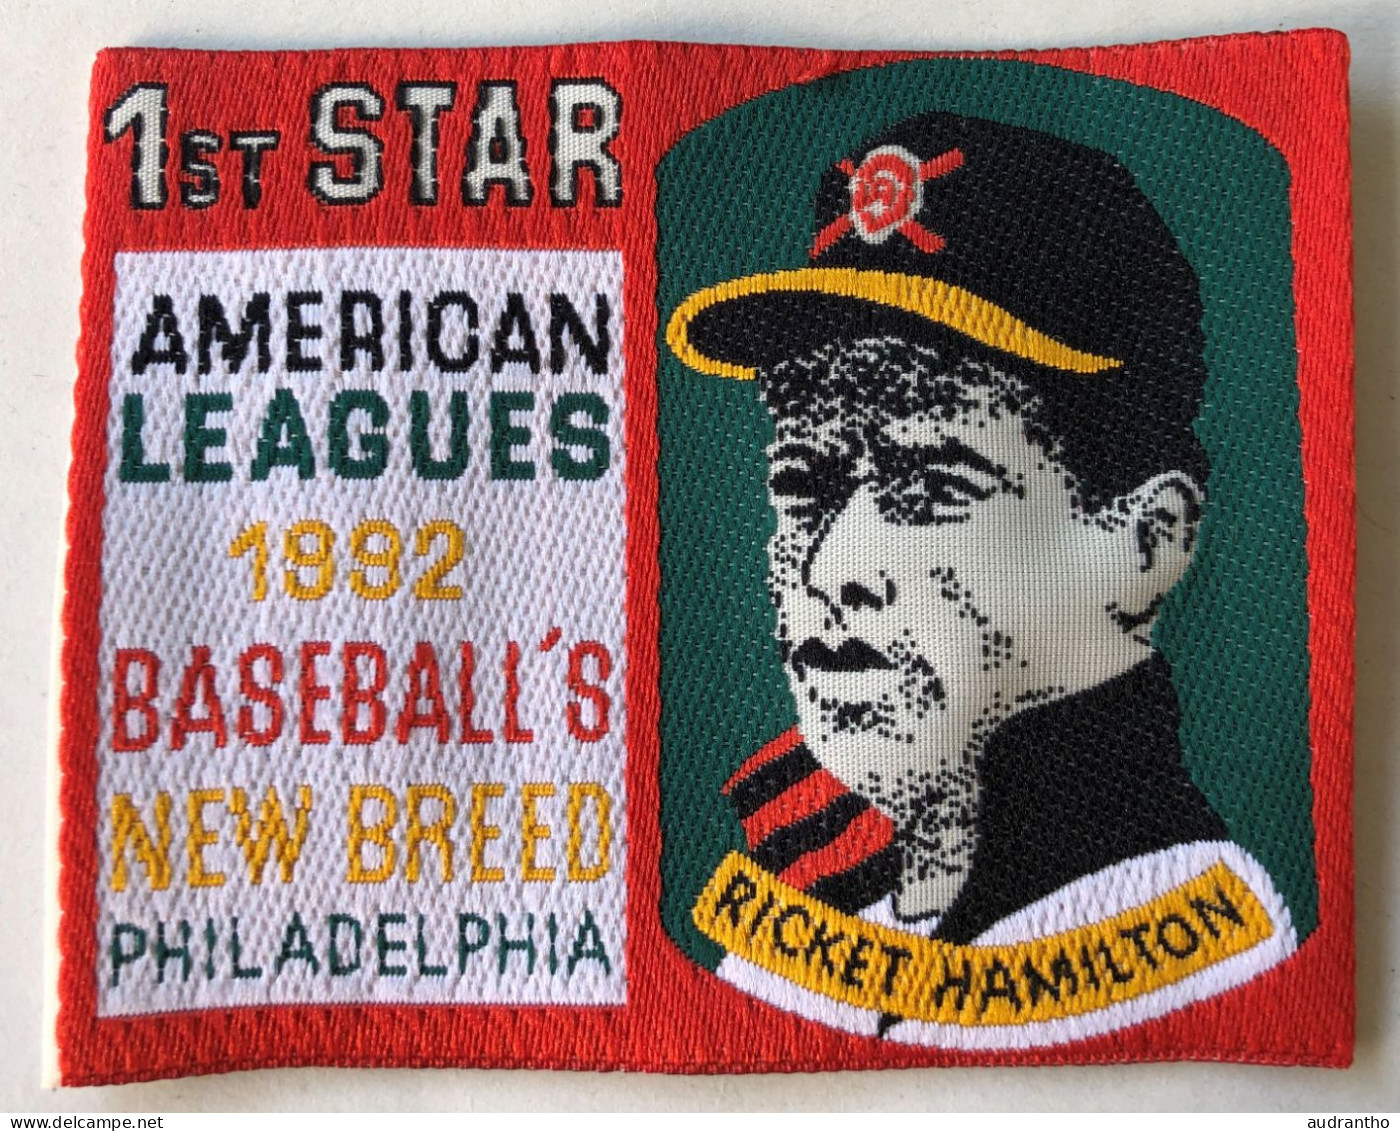 Grand écusson 1st Star American Leagues 1992 BASEBALL'S New Breed Philadelphia - Other & Unclassified